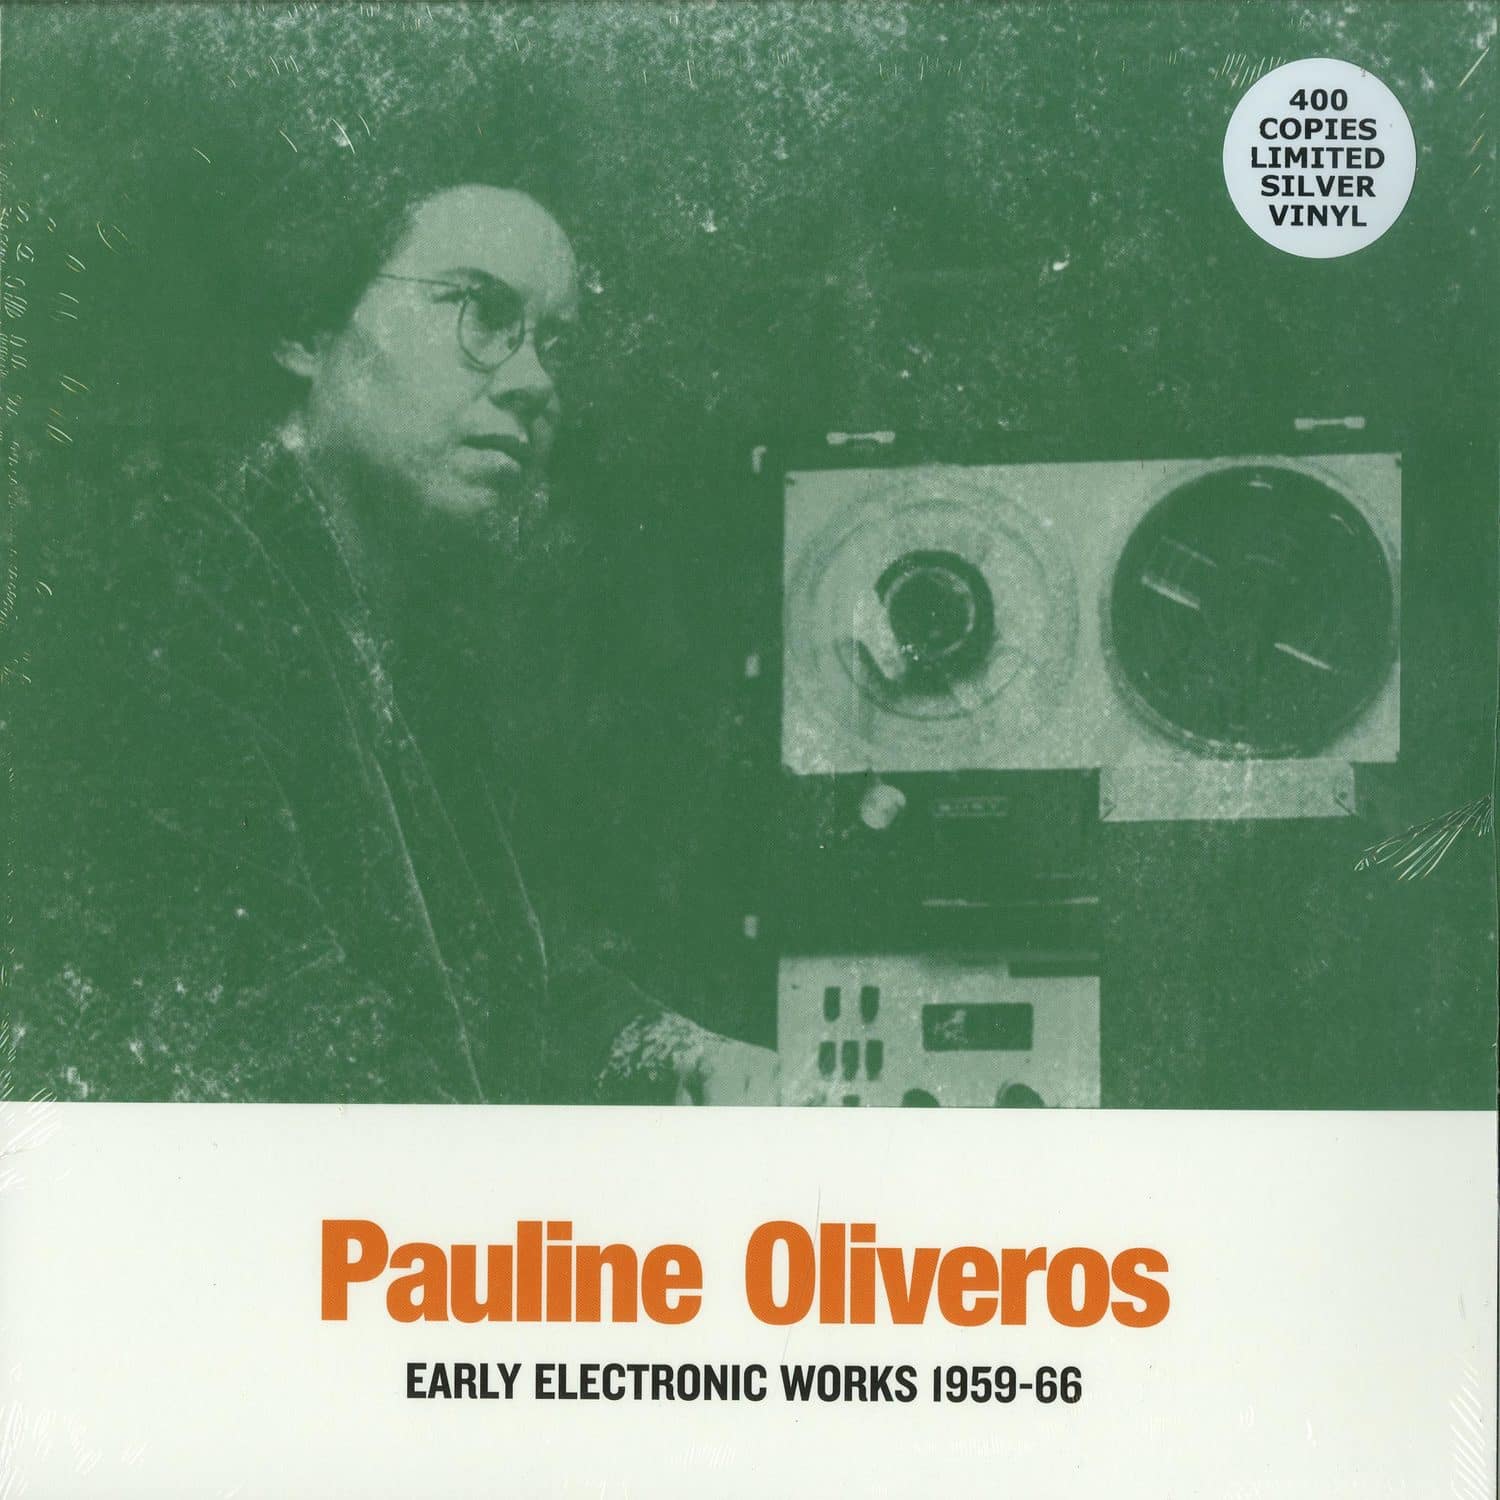 Pauline Oliveros - EARLY ELECTRONIC WORKS 1959-66 